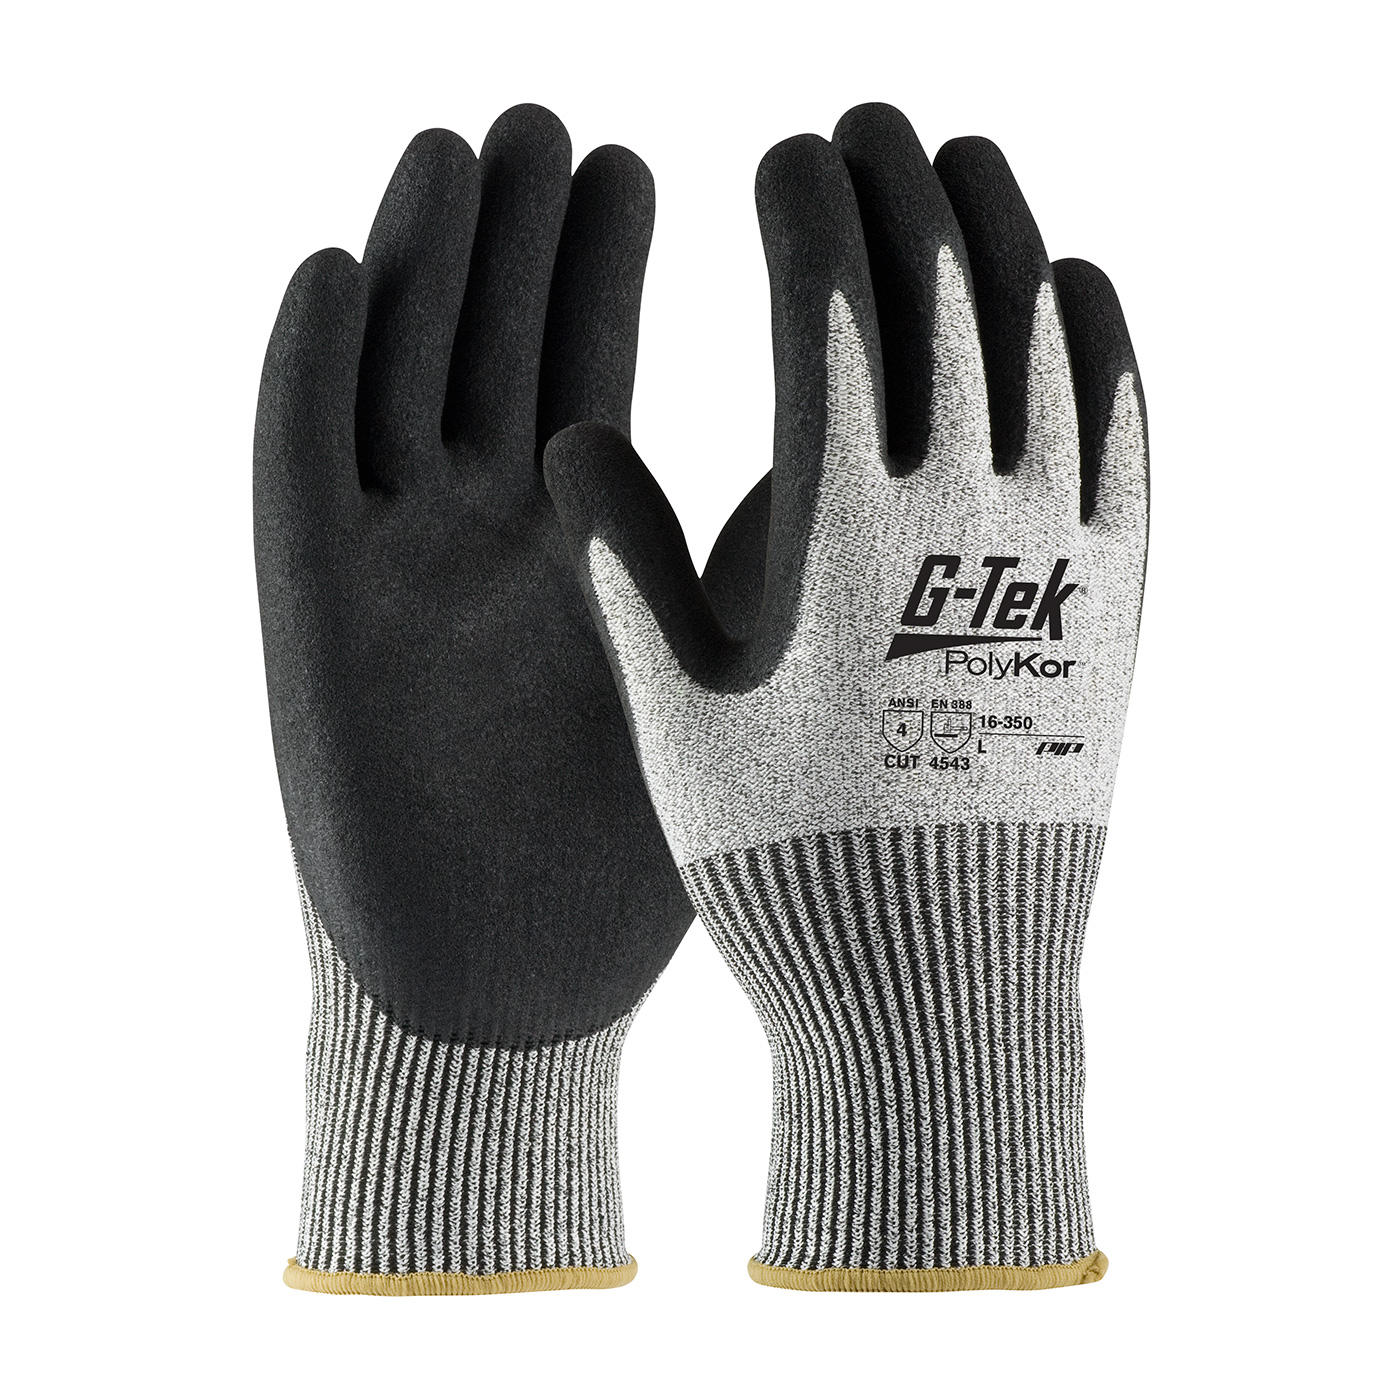 PIP 16-350/L G-Tek PolyKor Seamless Knit PolyKor Blended Glove with Double-Dipped Nitrile Coated MicroSurface Grip on Palm & Fingers - Large PID-16 350 L